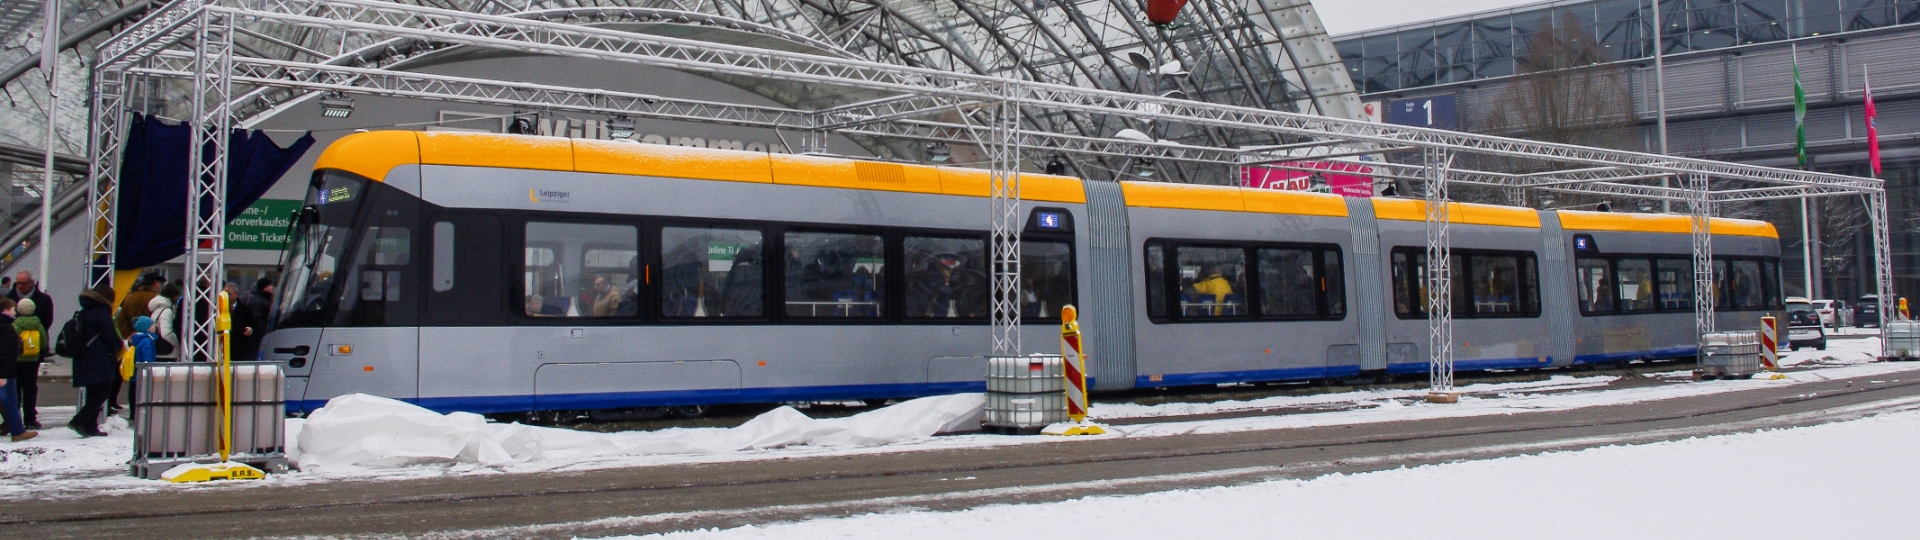 A tram from Solaris presented in Leipzig